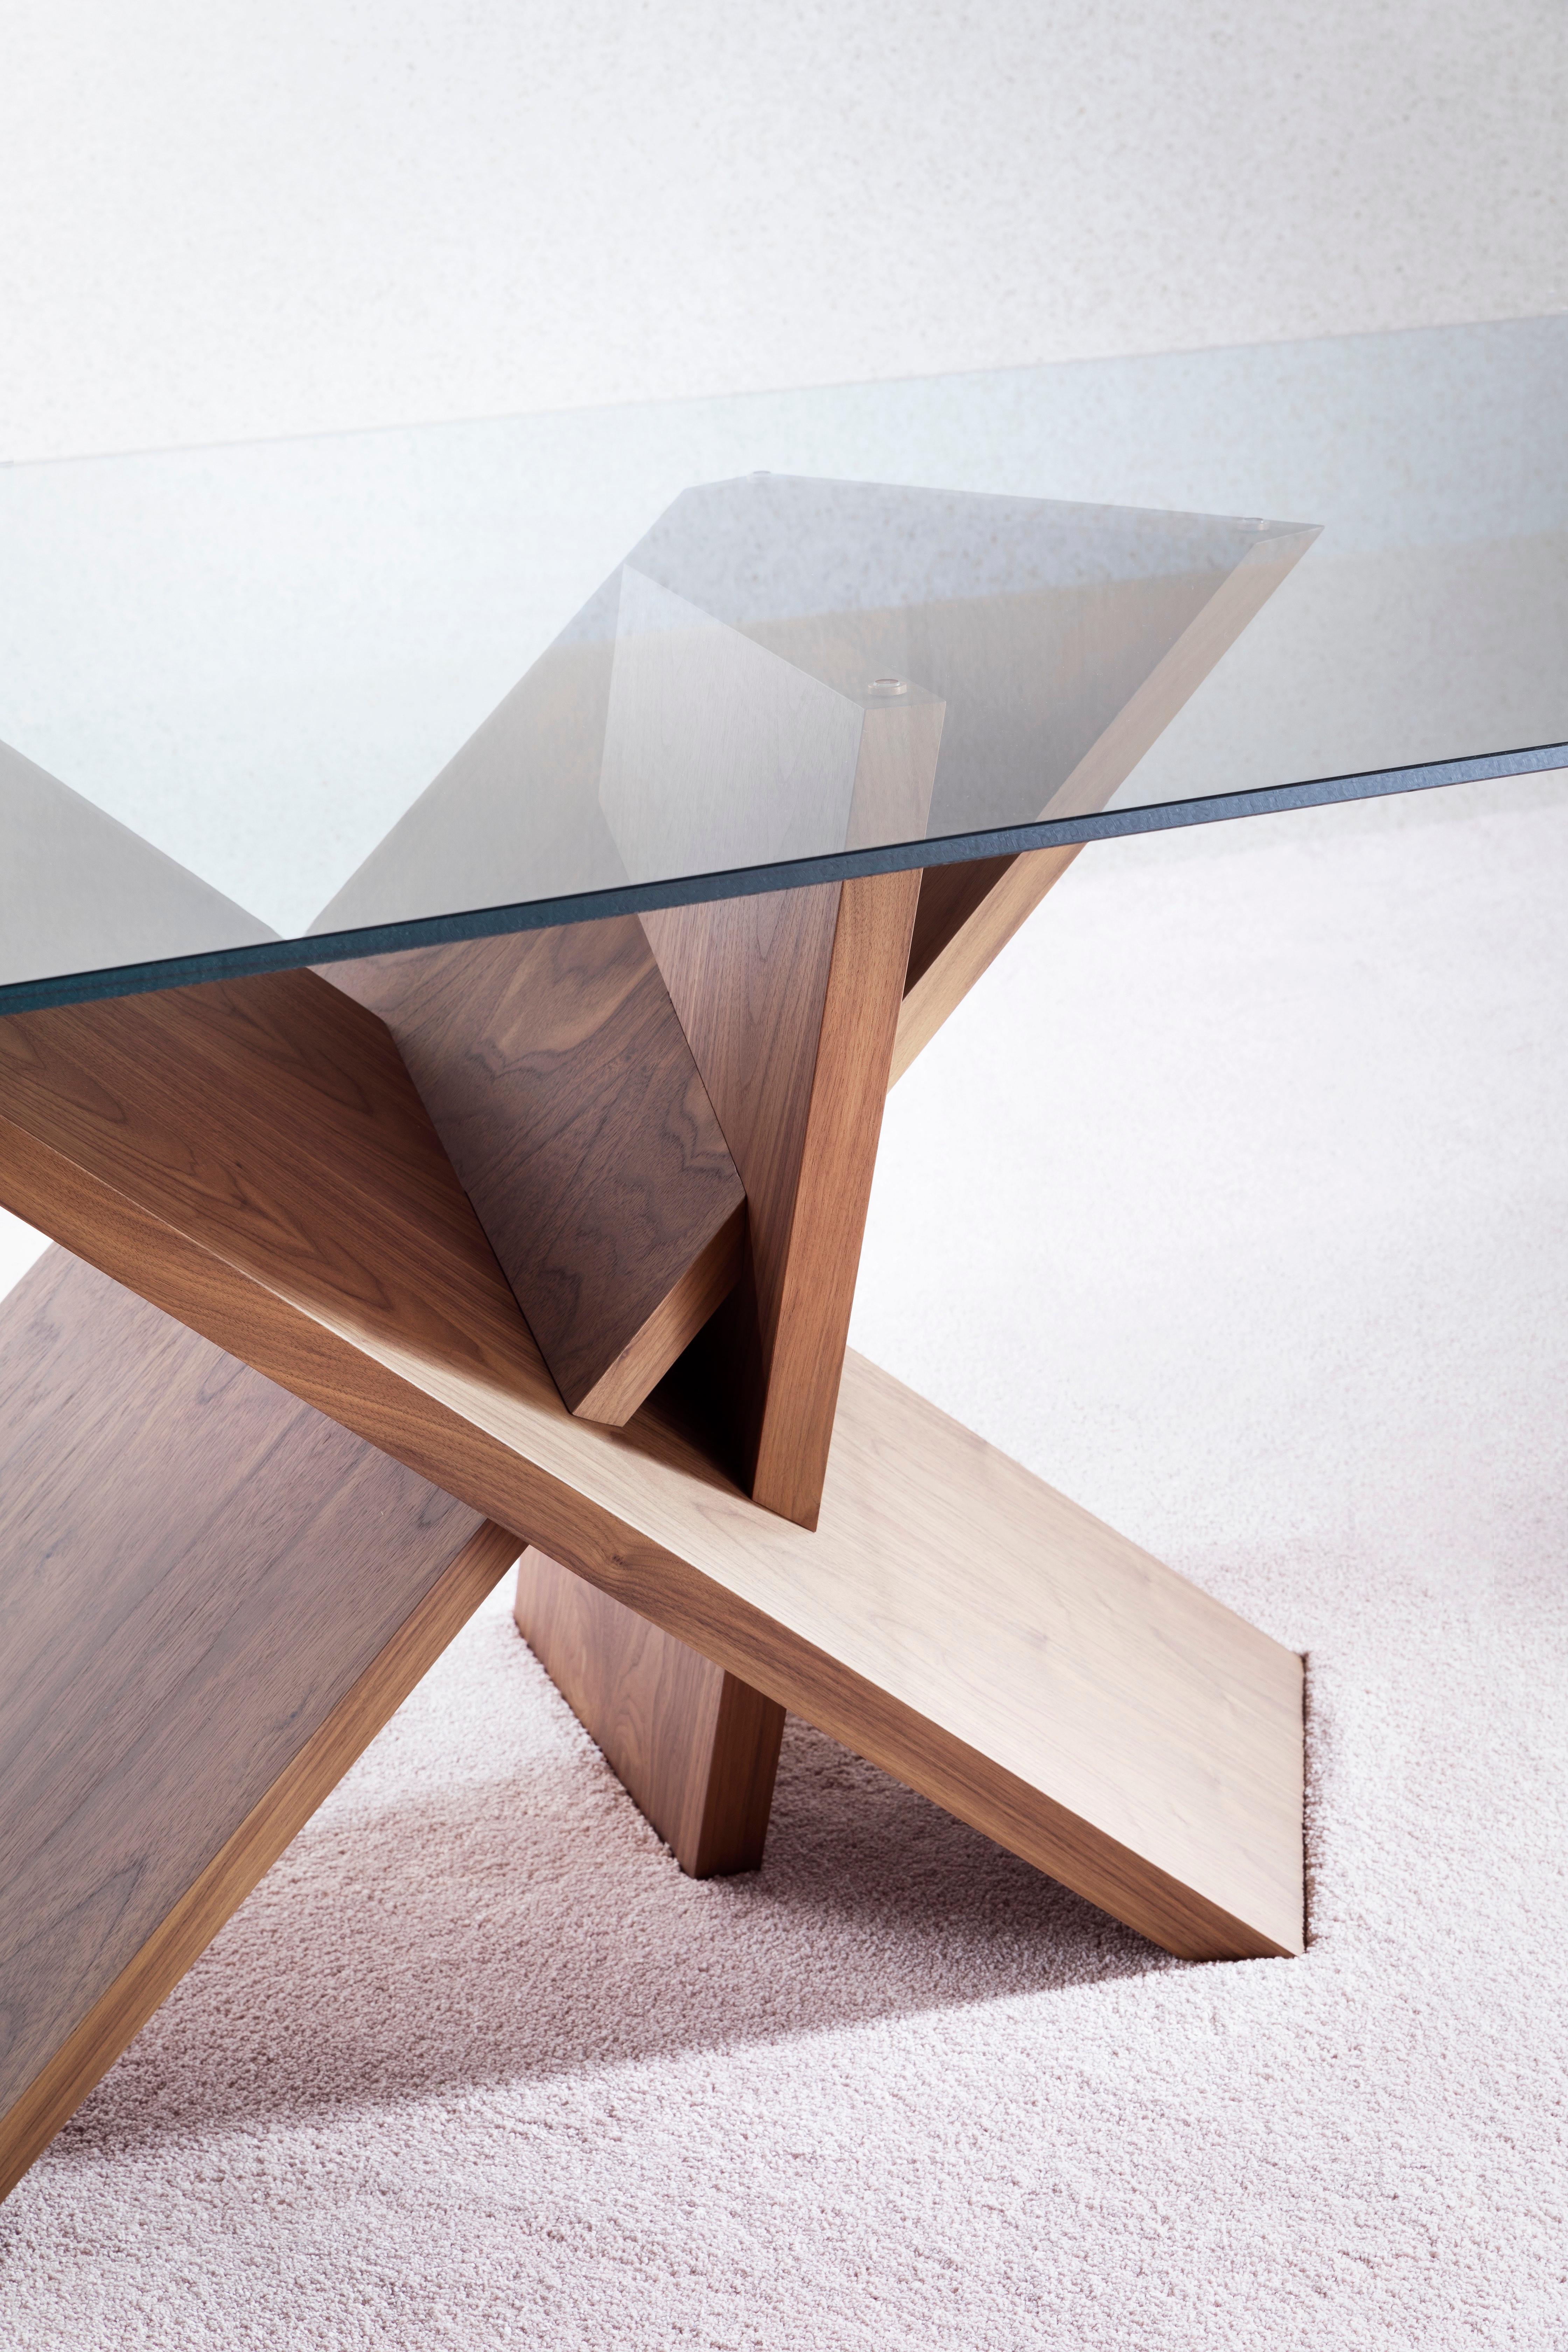 Inspired by Japanese design, Tripode stands between a dining table and a meeting table. The solid volume of the three legs combines with the fineness of the glass, for a statuesque element with strong engagement.

Additional